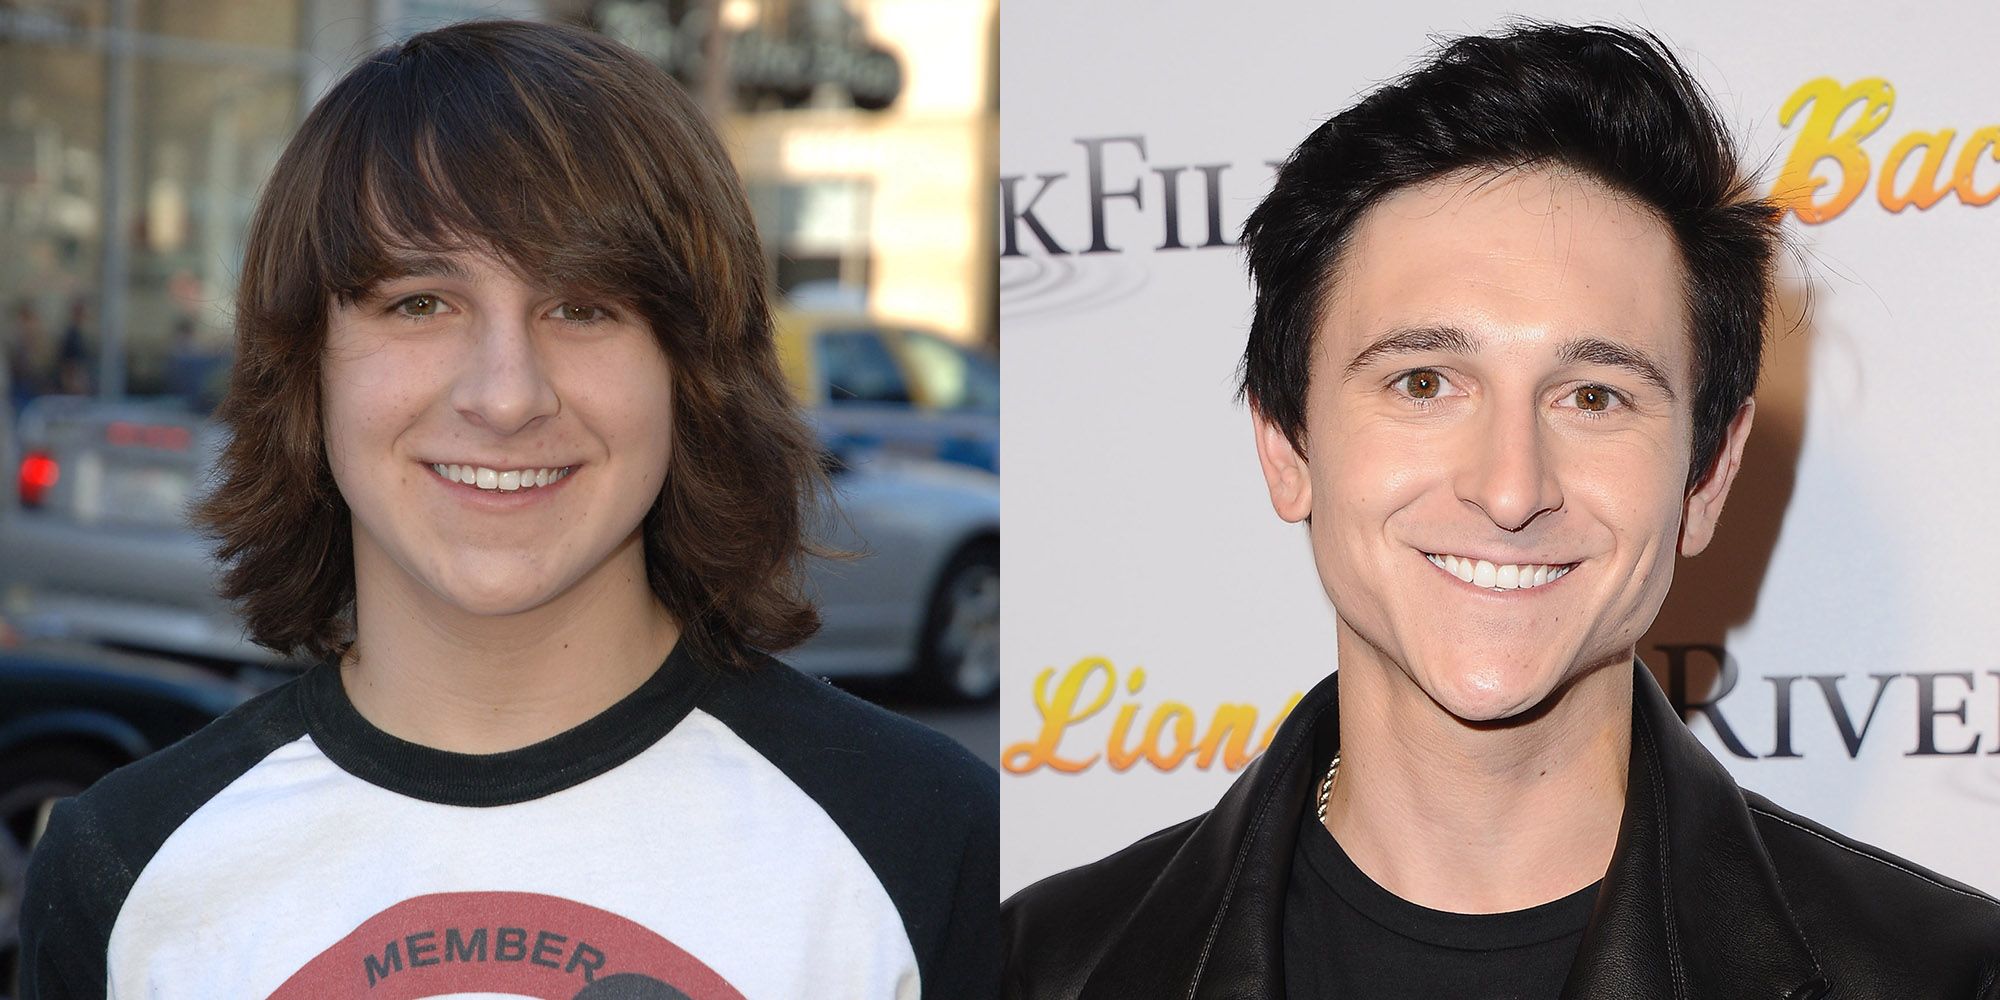 Mitchel musso hot shirtless nude naked.